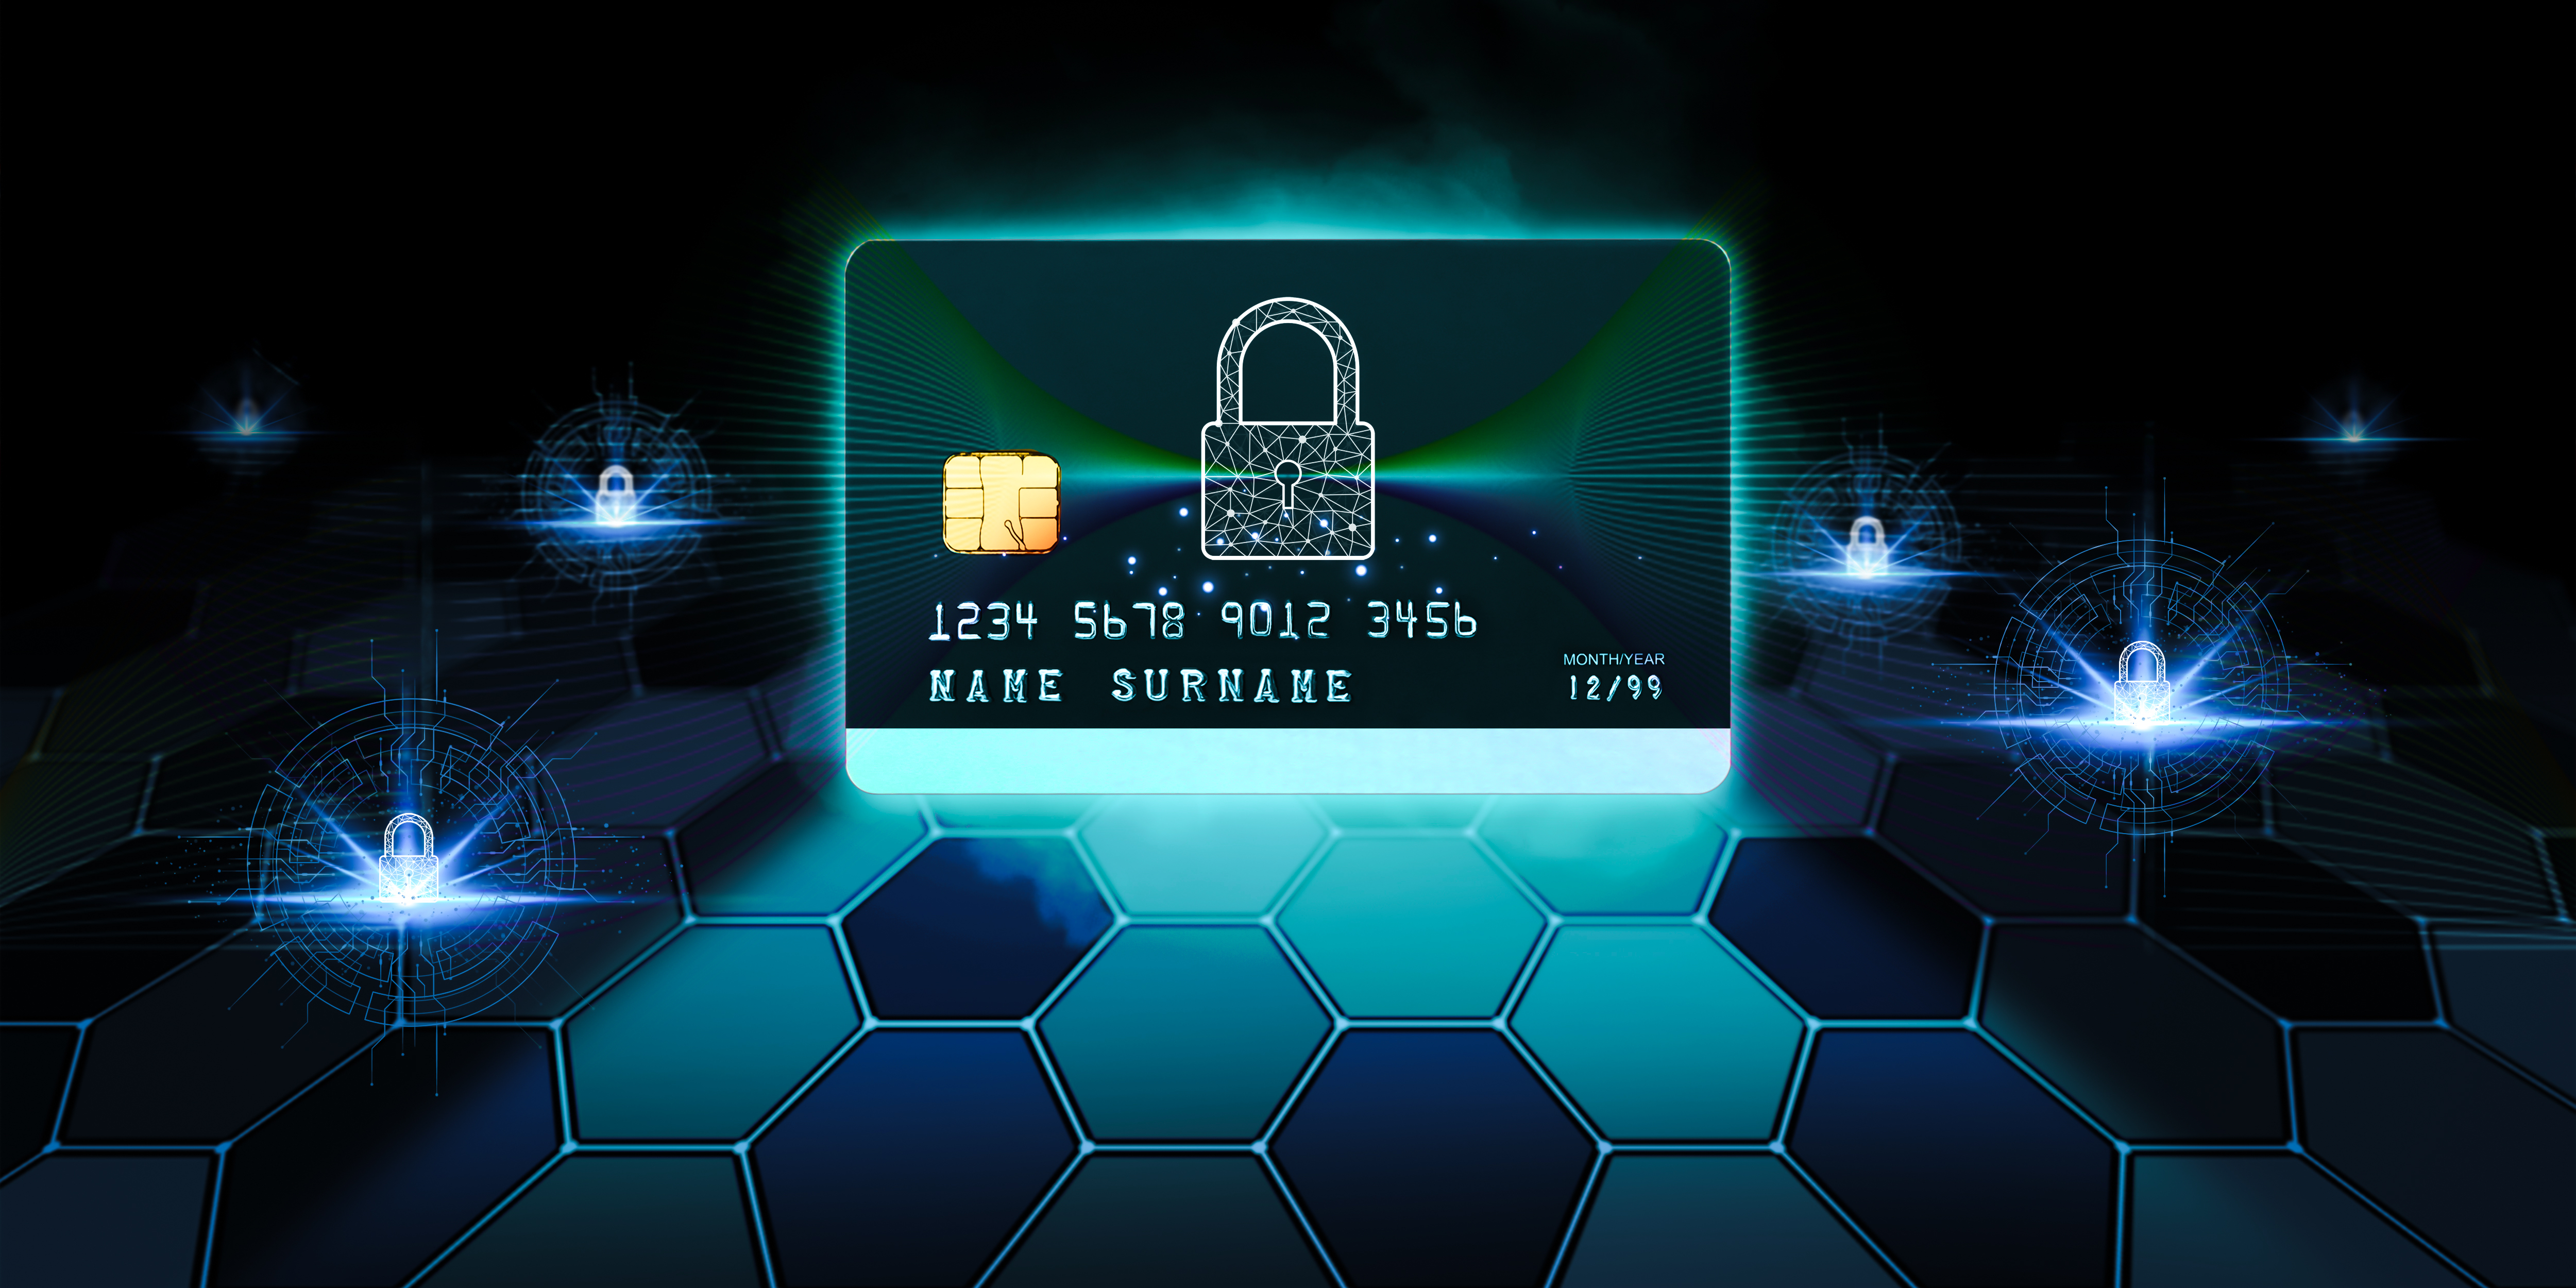 Illustration of a debit card with security measures in place. 